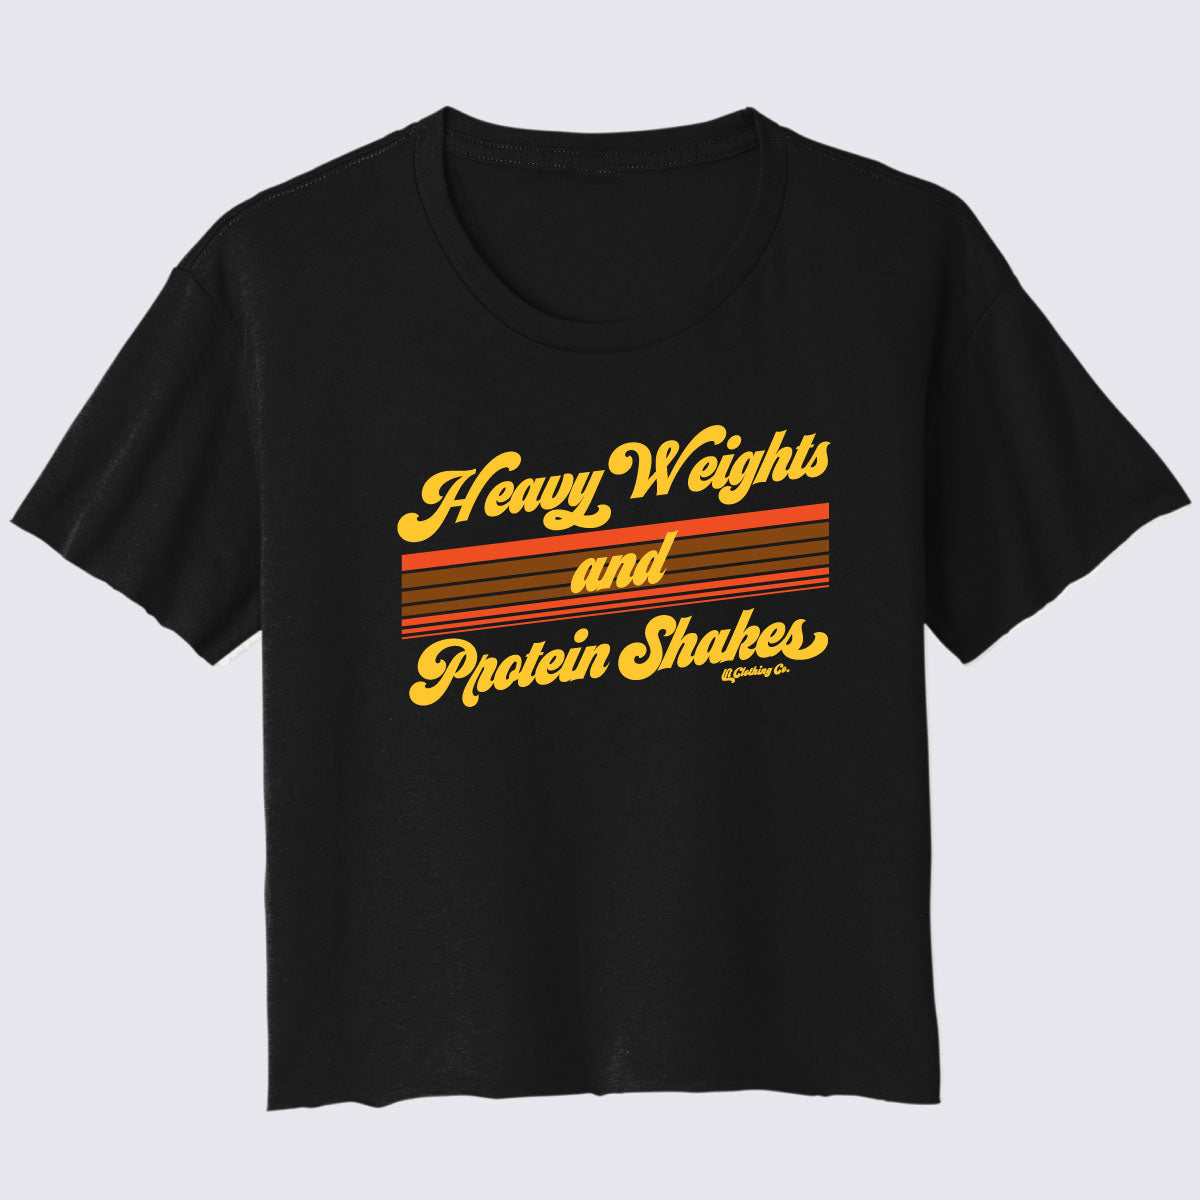 Heavy Weights &amp; Protein Shakes Women’s Festival Cali Crop Tee